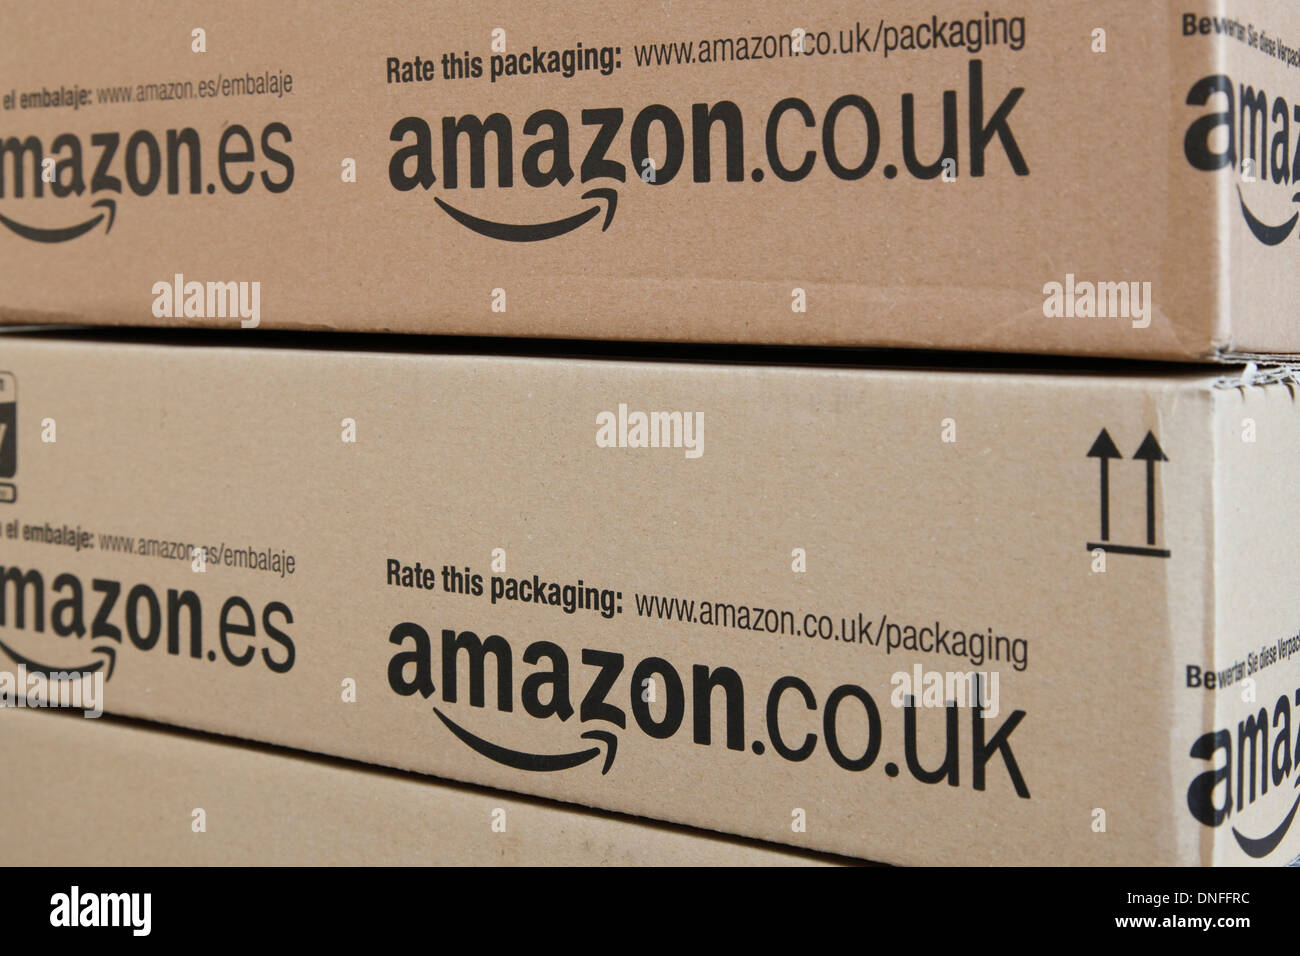 Amazon Boxes High Resolution Stock Photography and Images - Alamy